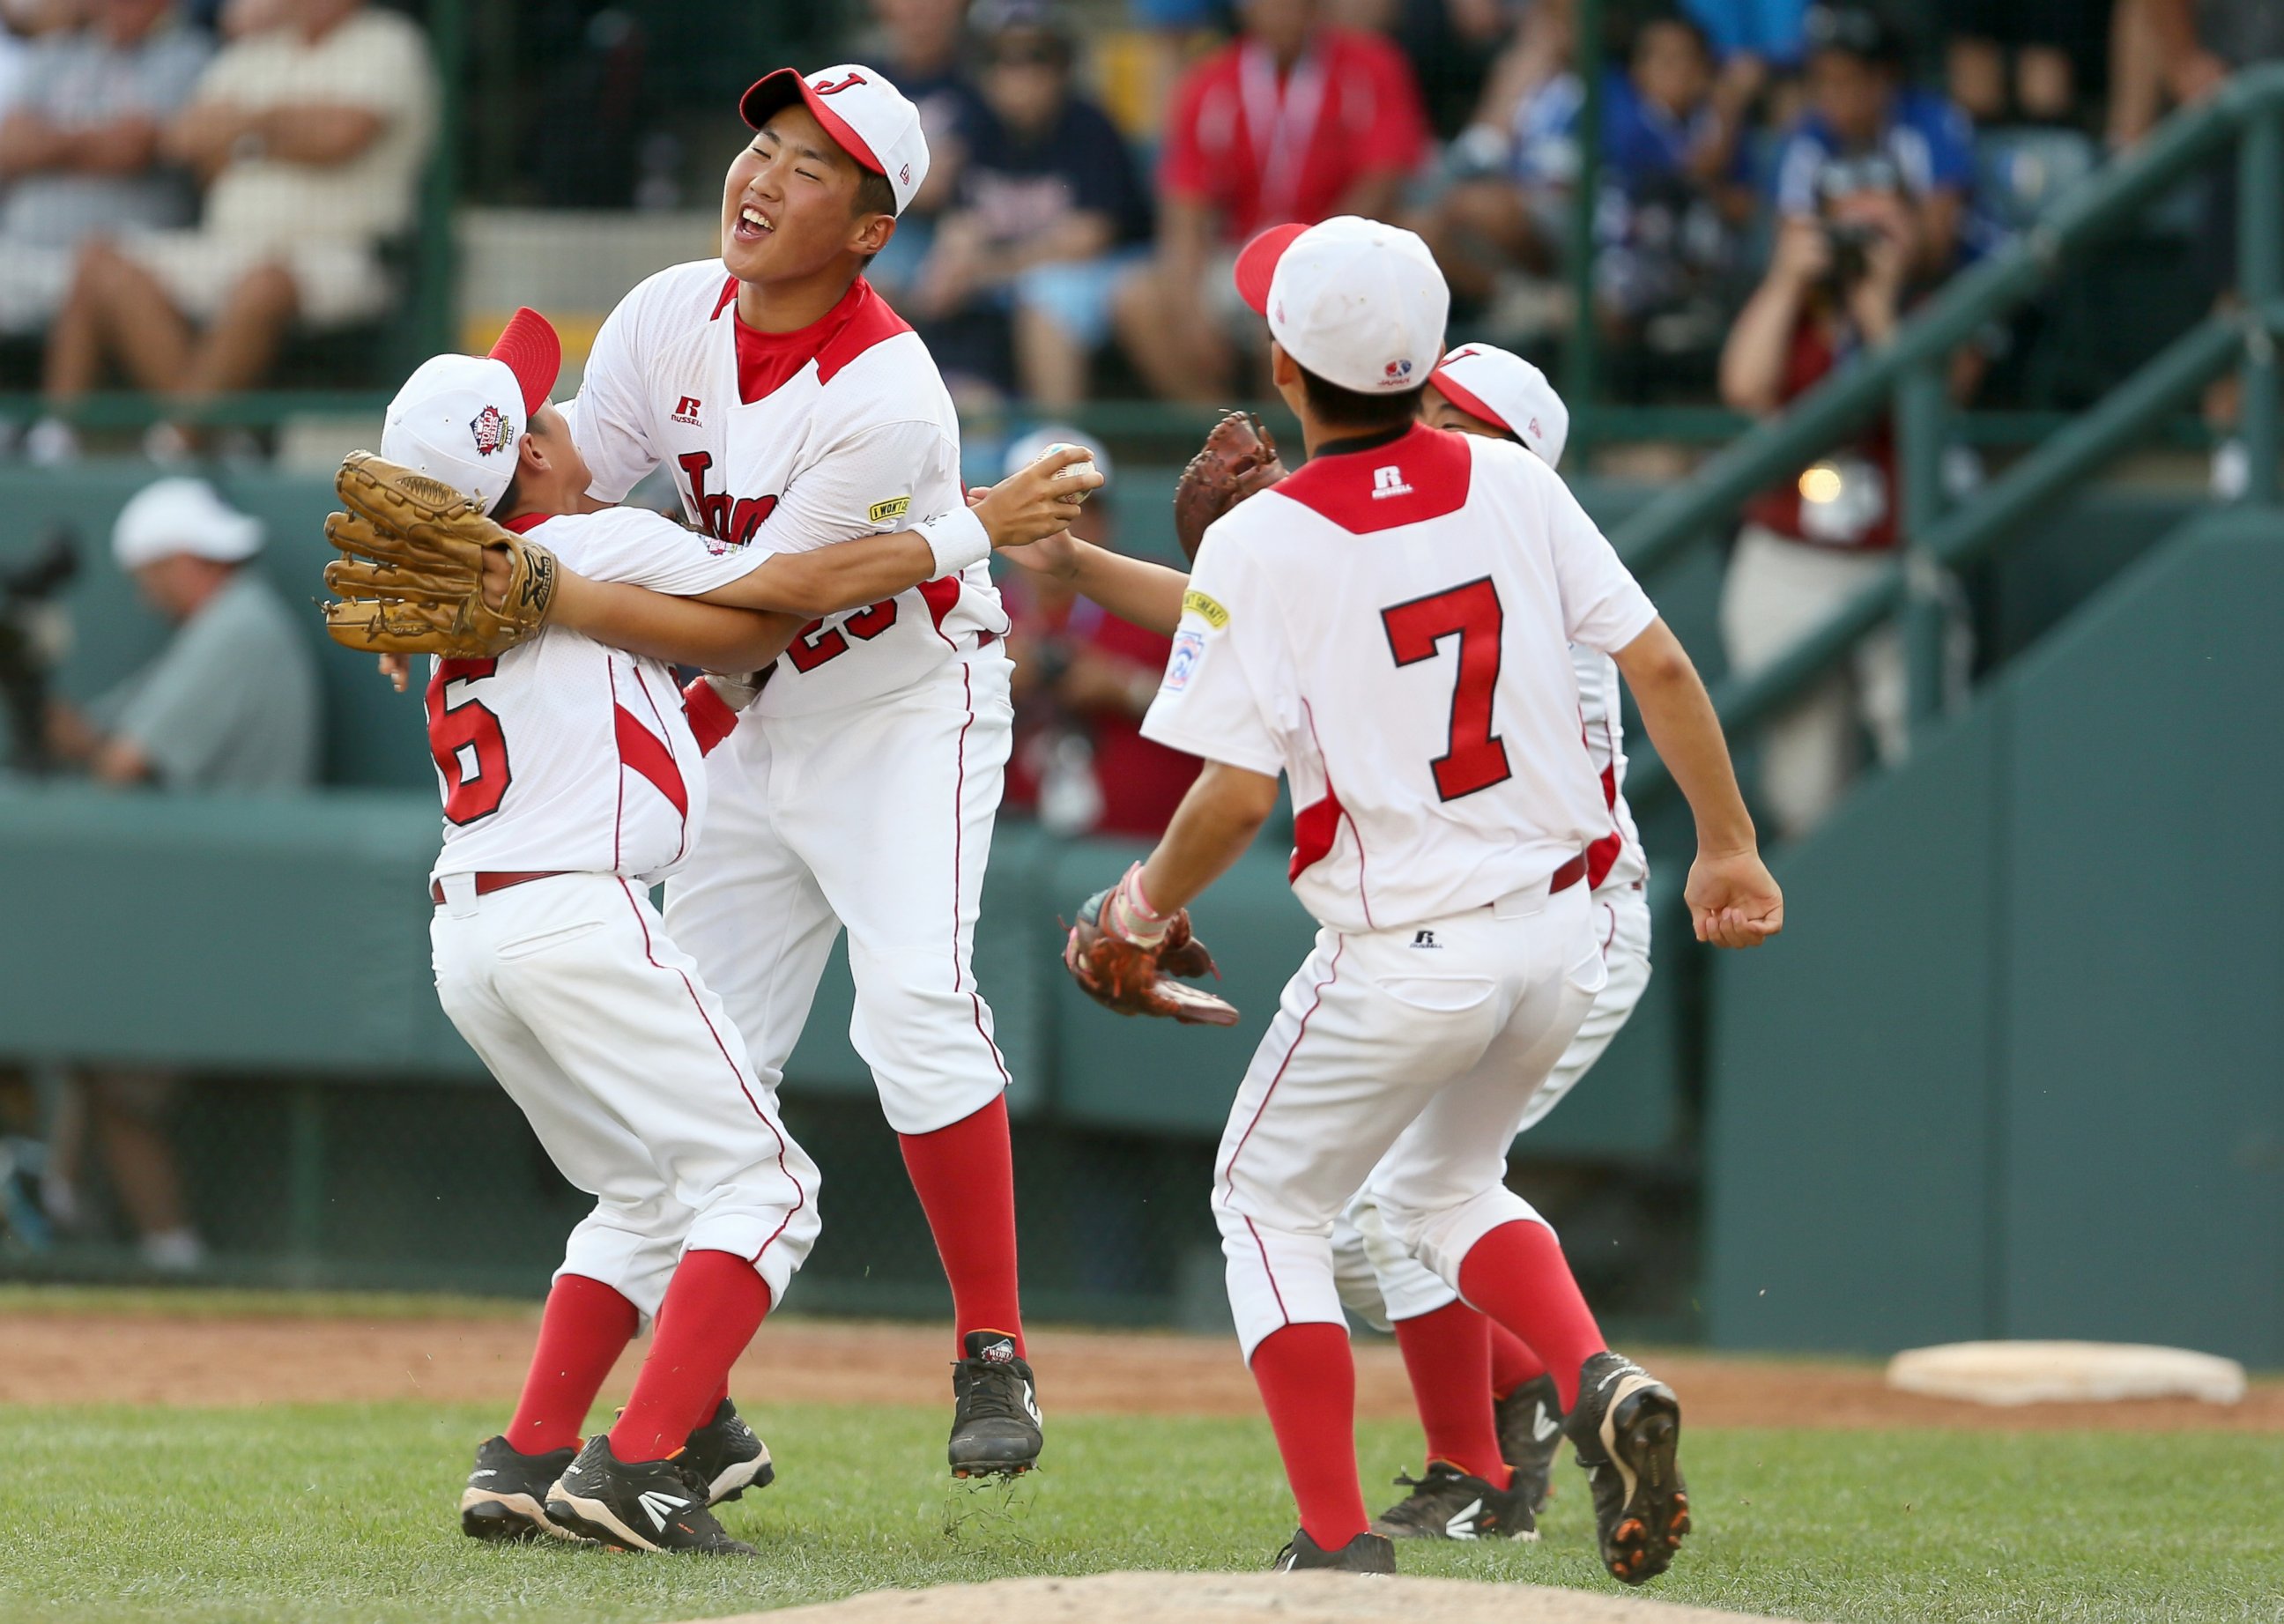 PHOTO: The Tokyo, Japan little league team celebrate after defeating the West team from Chula Vista, Ca 6-4  during the Little League World Series Championship game, Aug. 25, 2013, in Williamsport, Pa.